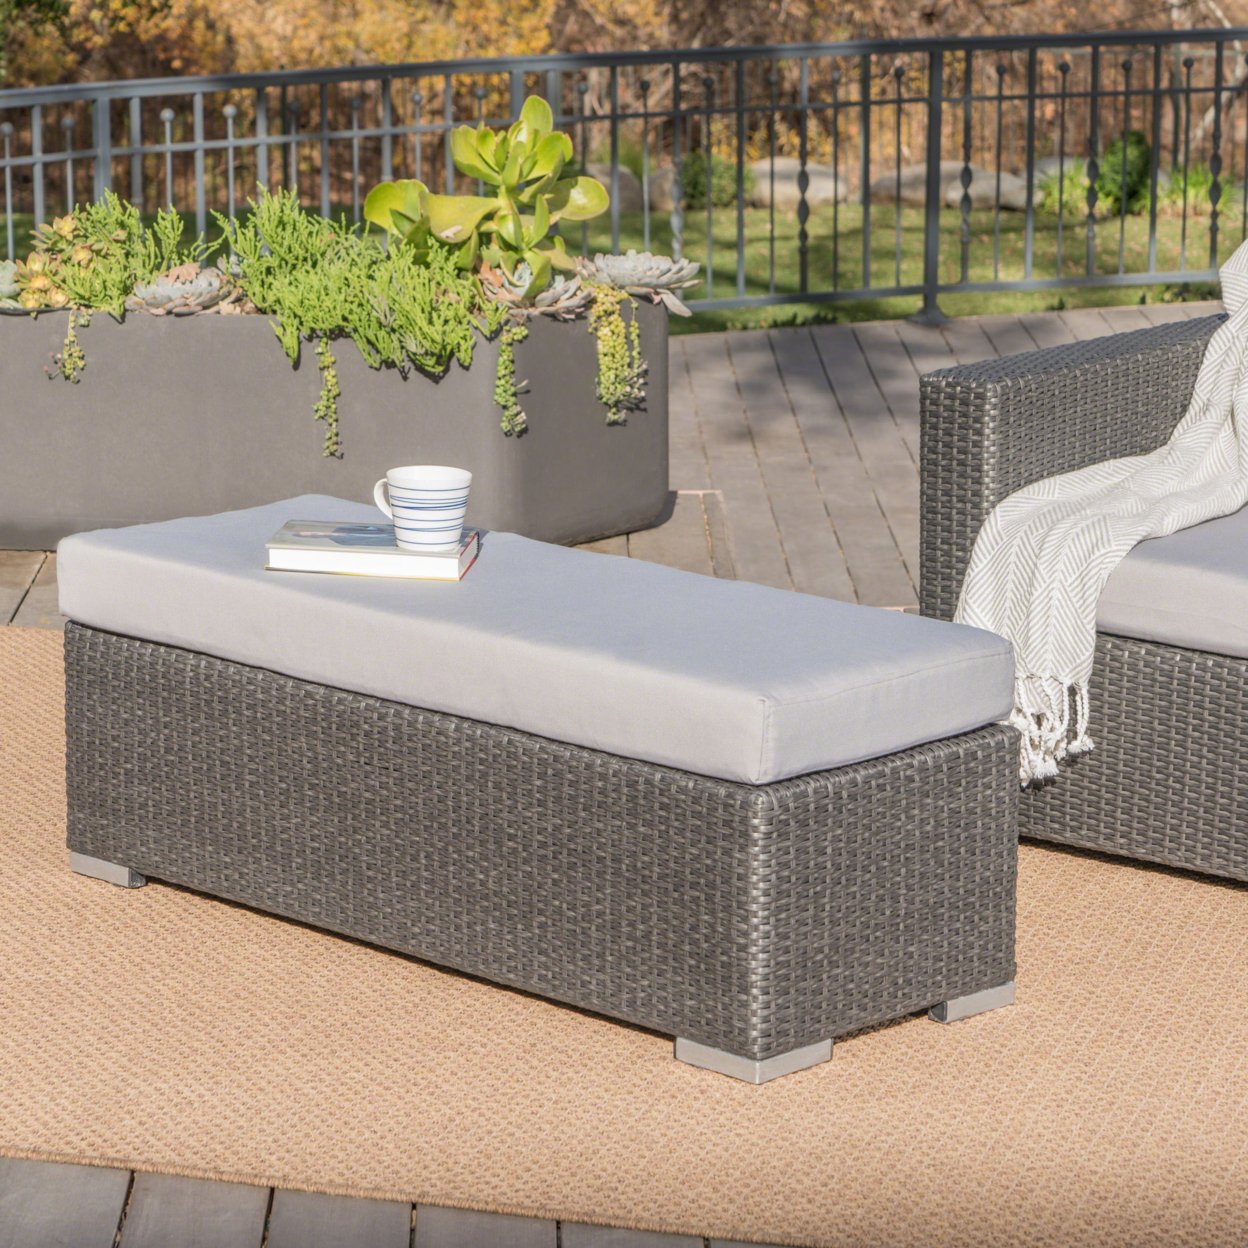 Santa Rosa Outdoor Wicker Bench With Water Resistant Cushion - Gray/Silver